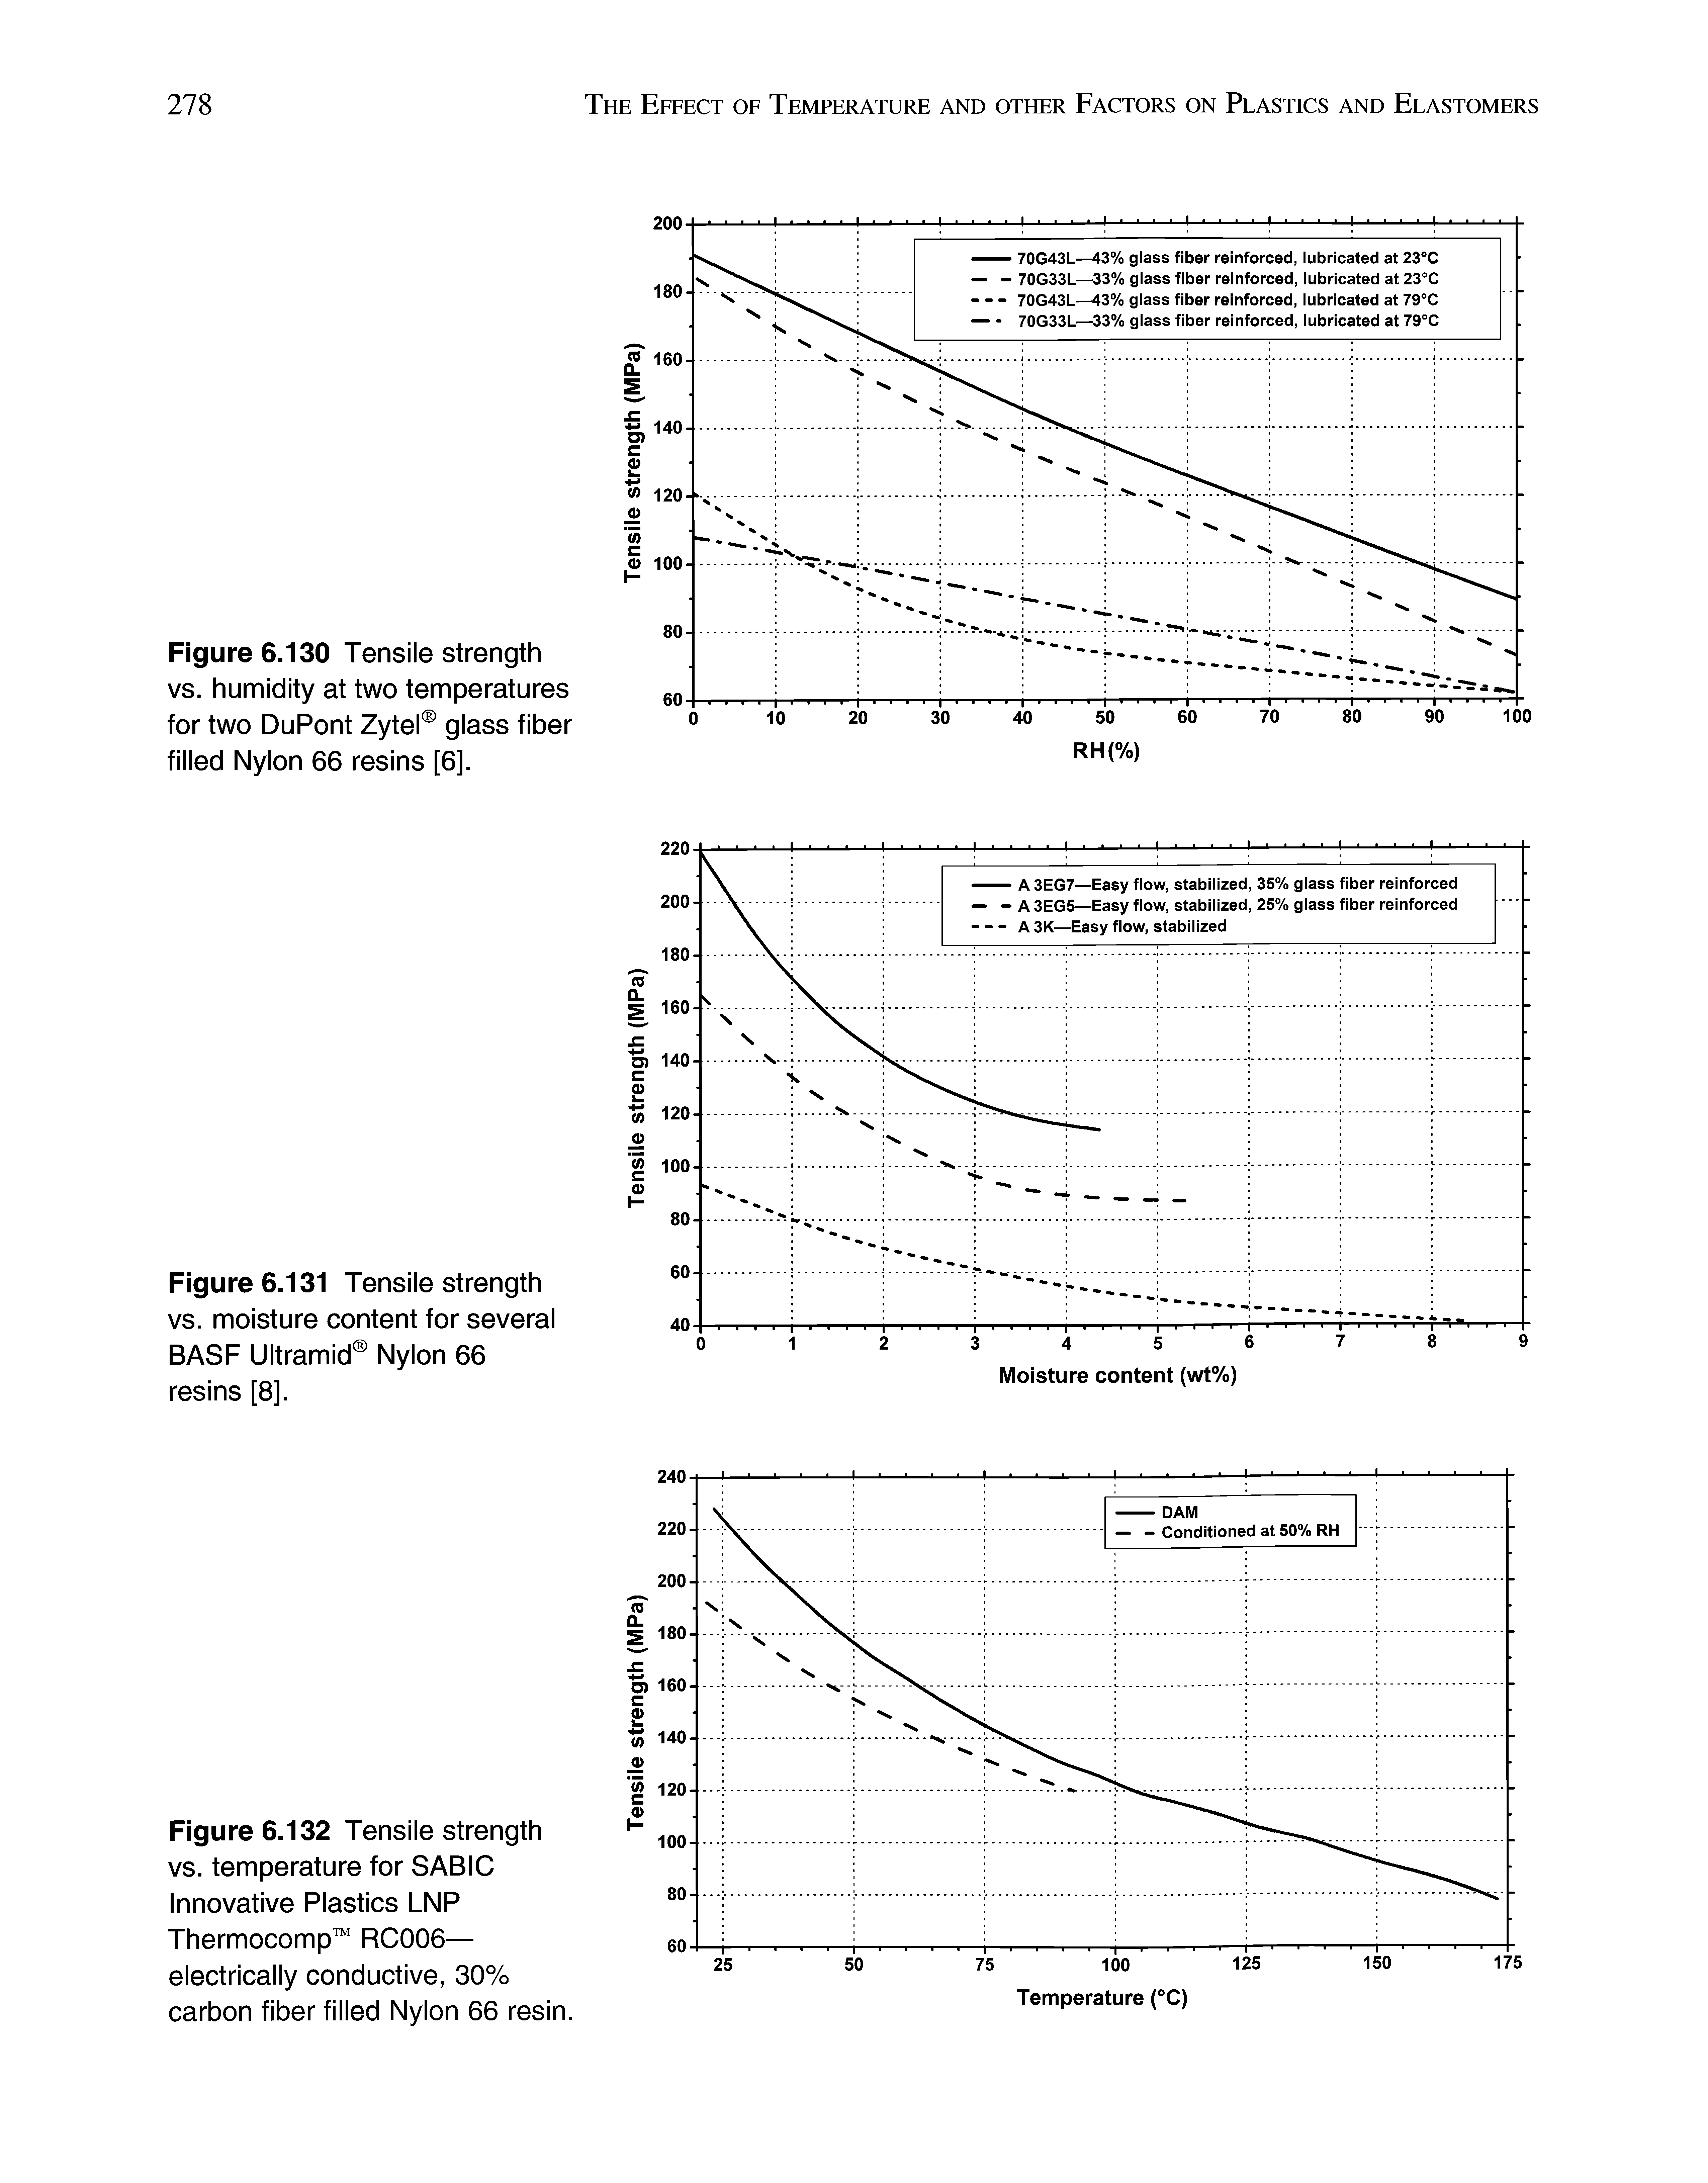 Figure 6.130 Tensile strength vs. humidity at two temperatures for two DuPont Zytel glass fiber filled Nylon 66 resins [6].